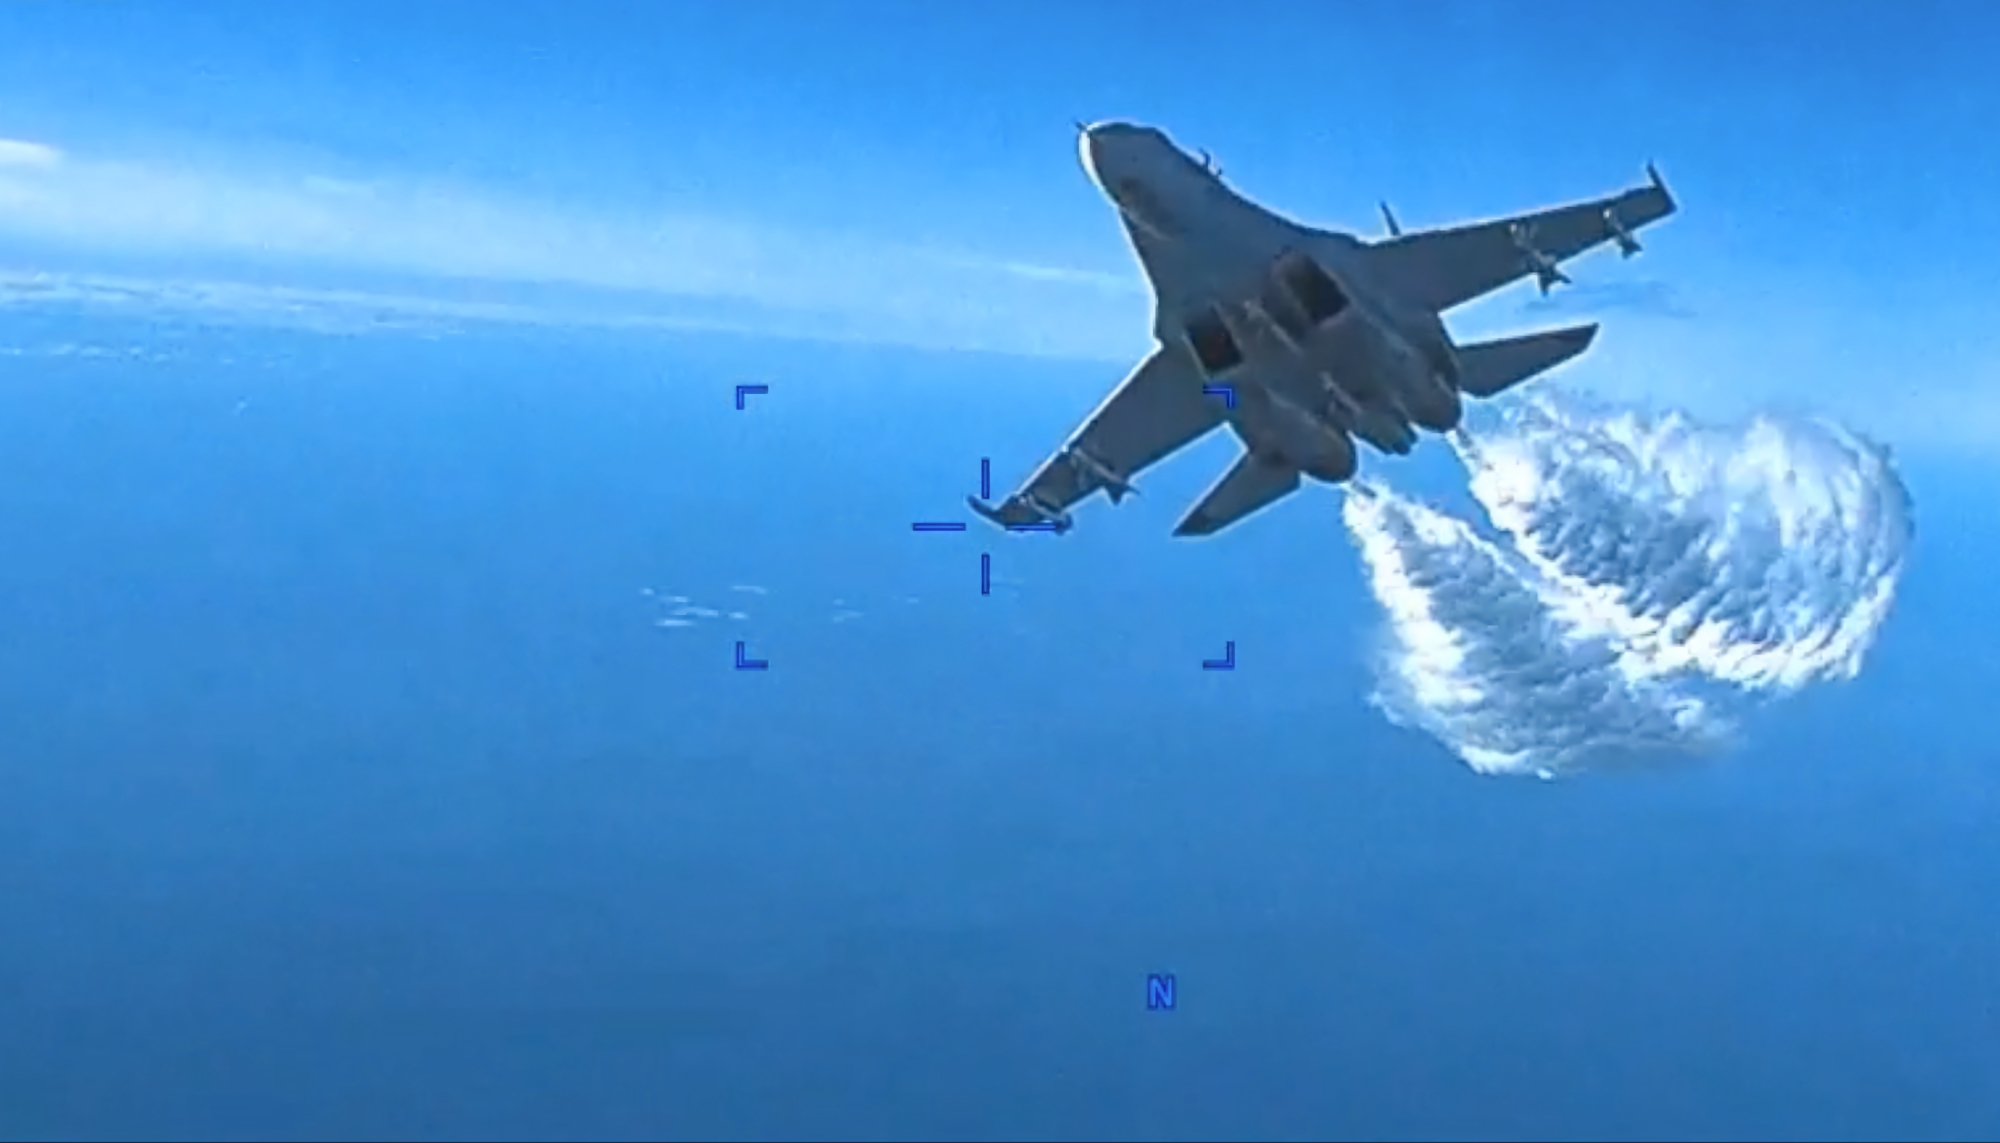 The US Air Force showed video of a Russian Su-27 fighter jet colliding with a US MQ-9 Reaper UAV over the Black Sea on 14 March